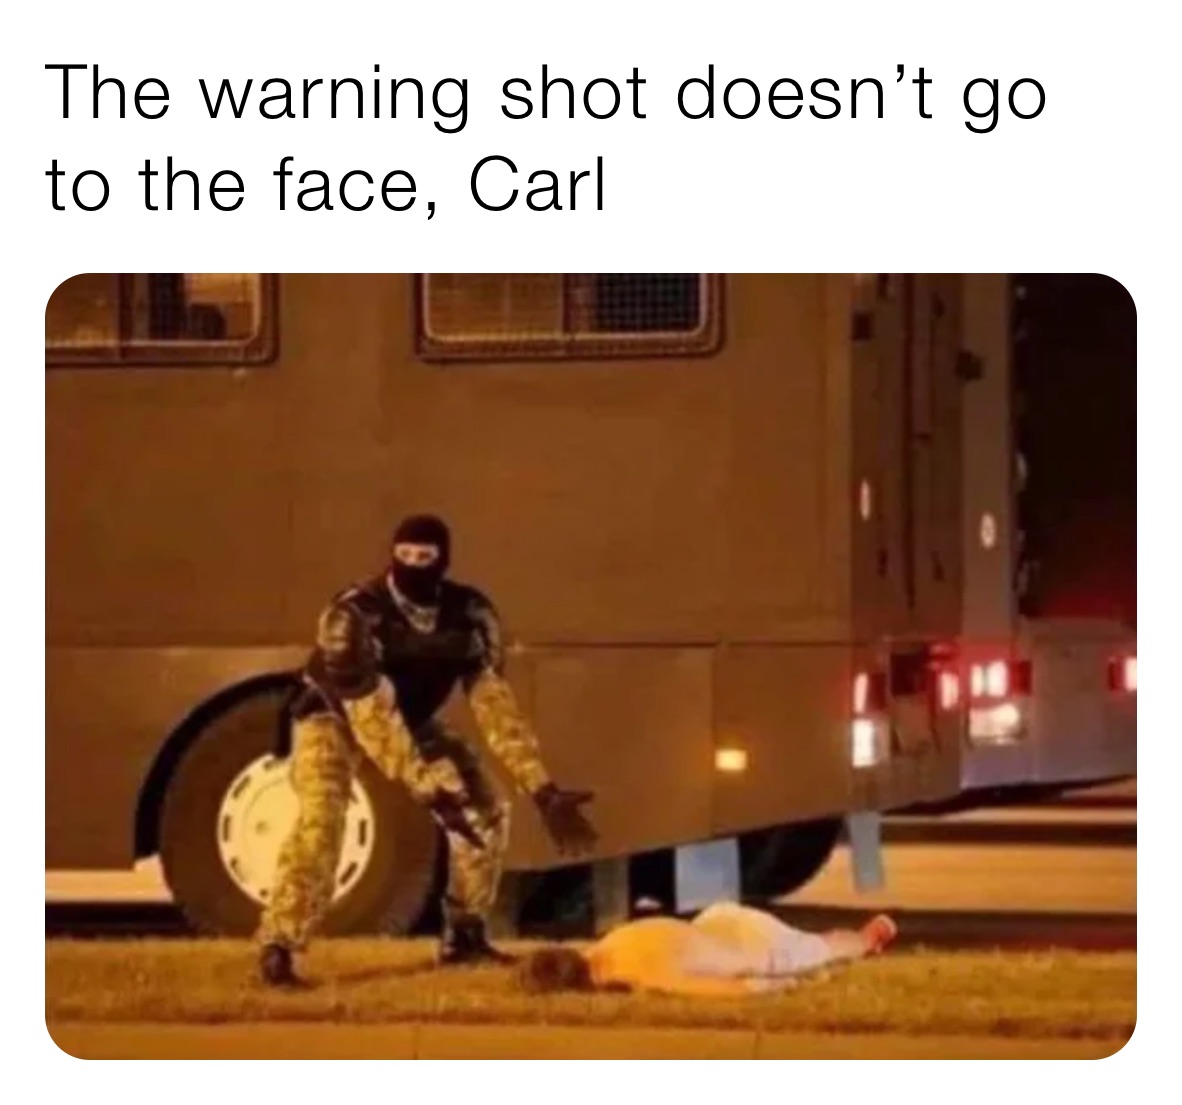 The warning shot doesn’t go to the face, Carl